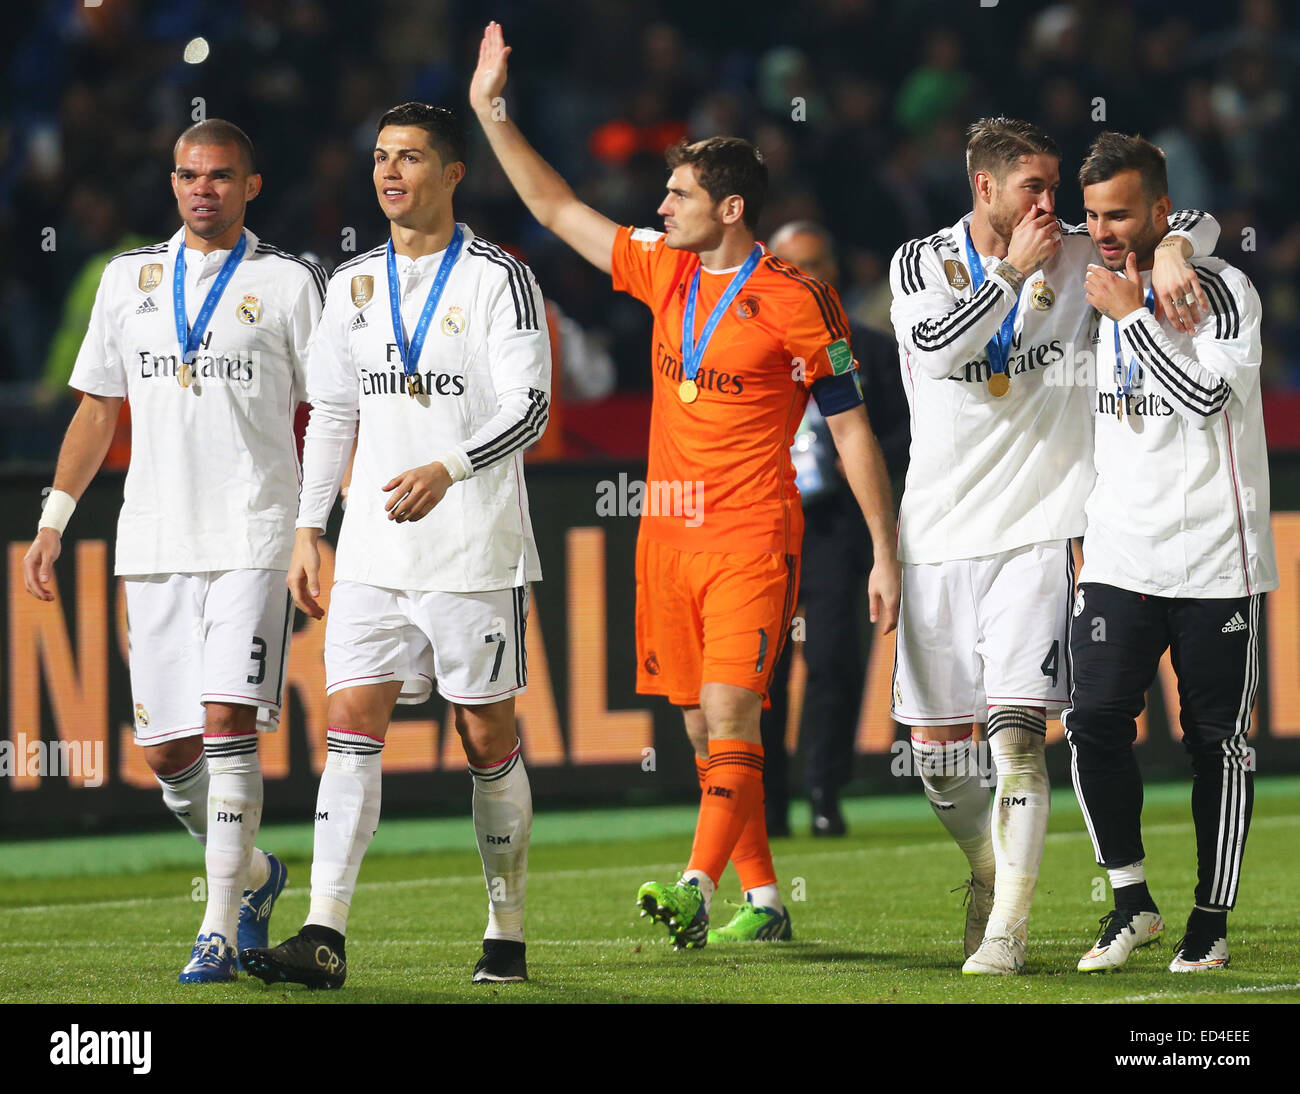 Marrakesh, Morocco. 20th Dec, 2014. FIFA World Club Cup. Final. Real Madrid versus San Lorenzo. Real Madrid goalkeeper Iker Casillas thanks the fans. © Action Plus Sports/Alamy Live News Stock Photo